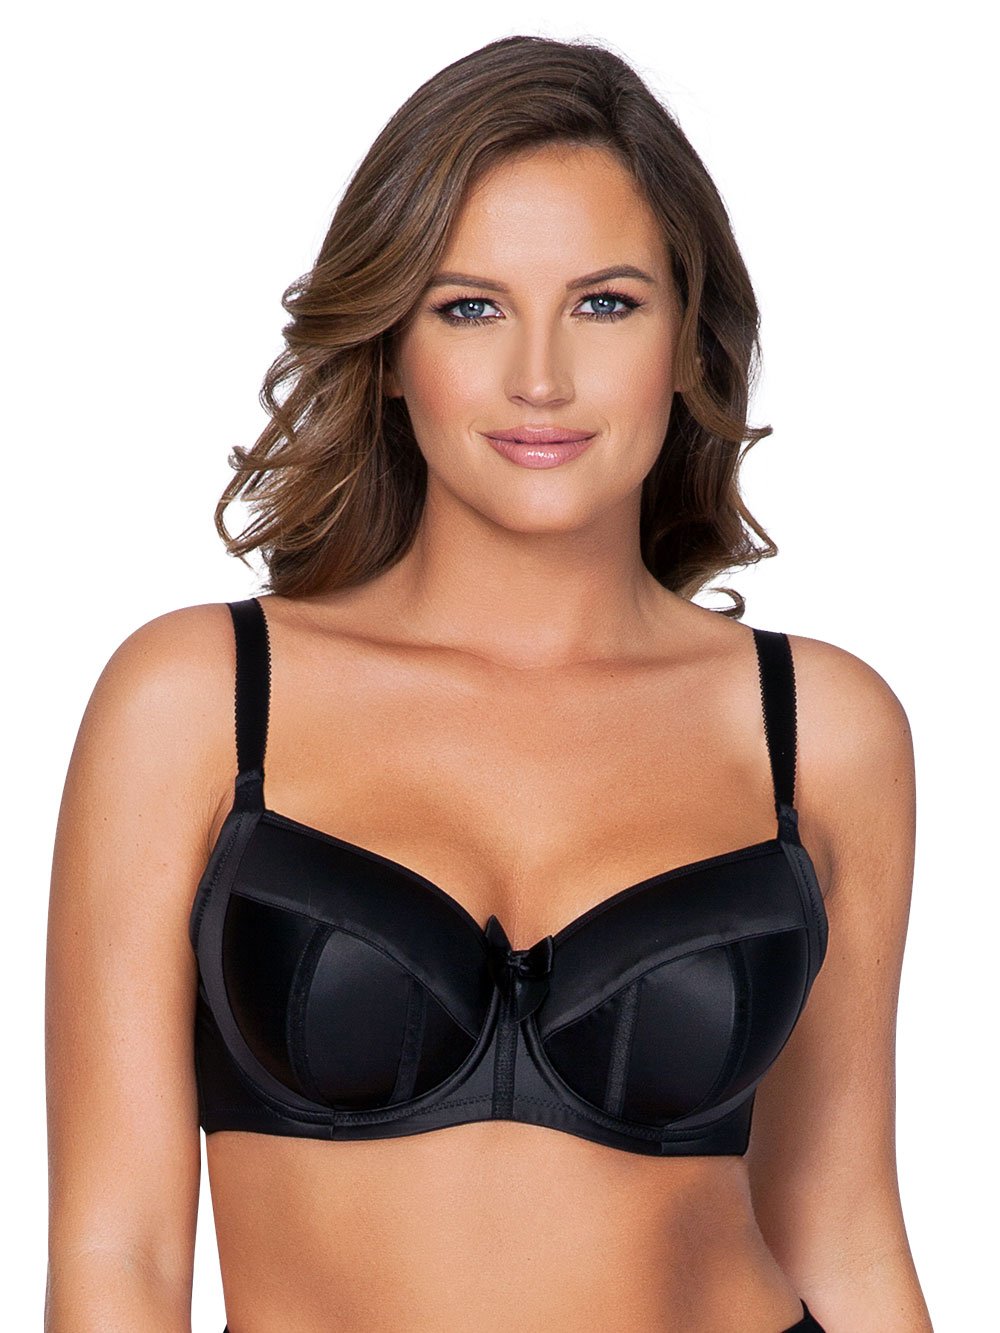 32G Bra Size in G Cup Sizes by Parfait Convertible Plus Size